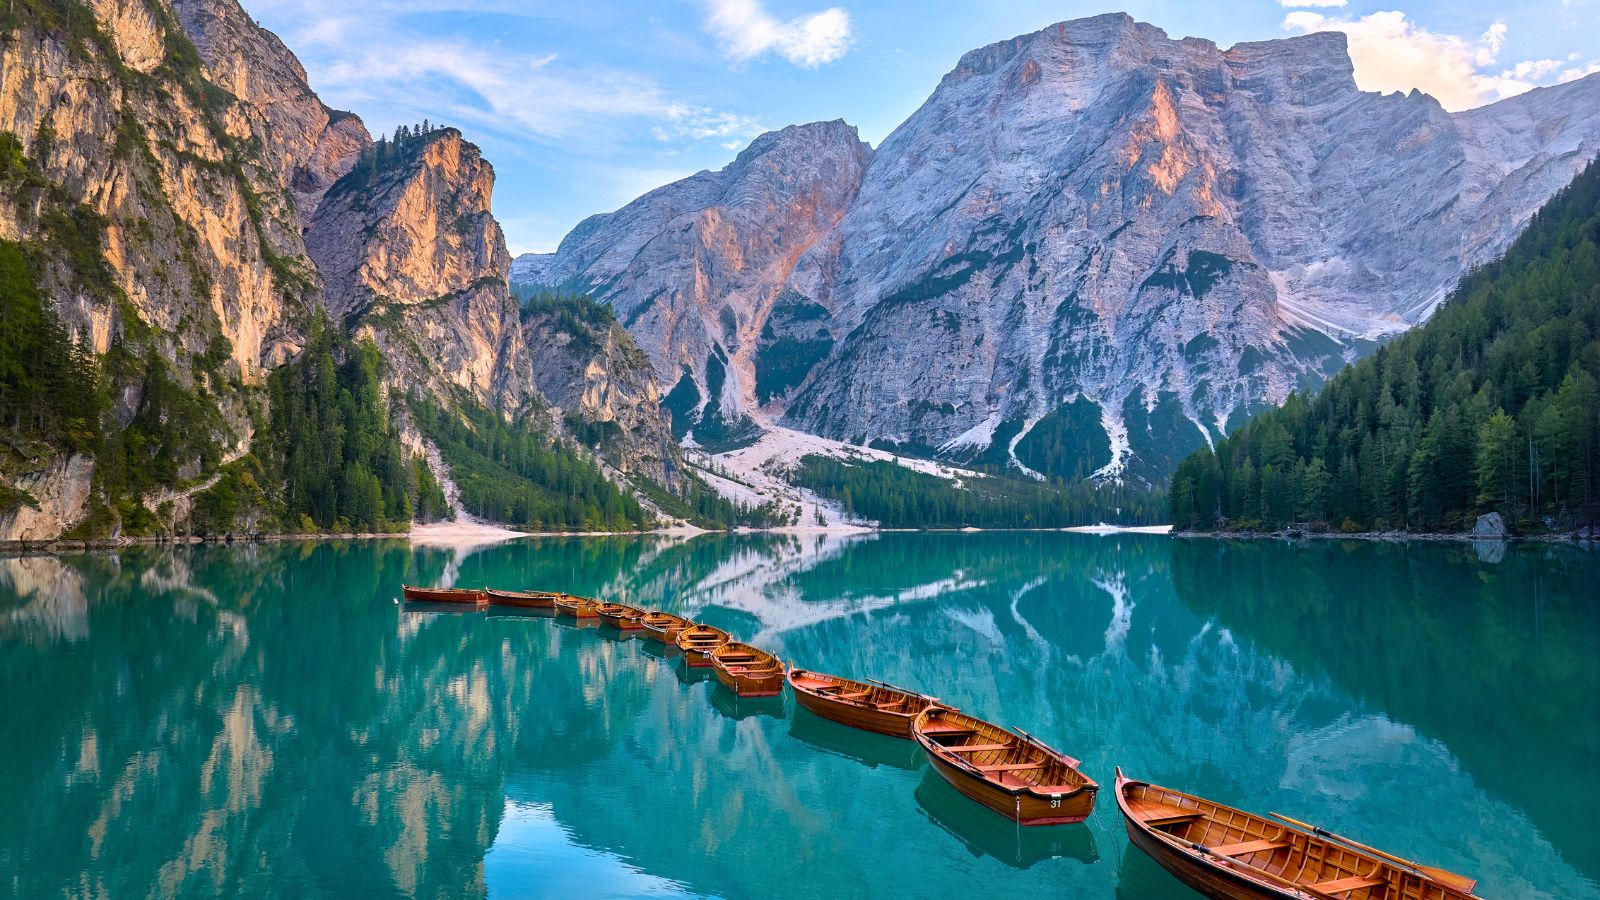 <p><span>On the topic of beautiful lakes, Lake Braies near the Dolomites deserves special mention. It’s not exactly </span><i><span>hidden</span></i><span>, per see.</span></p><p><span>Many tourists visit to see its magical turquoise waters and snowcapped mountains. However, the lake </span><i><span>is</span></i><span> slightly off-the-beaten path. To get there, you have to visit the far northeast of Italy, close to the Austrian border.</span></p>